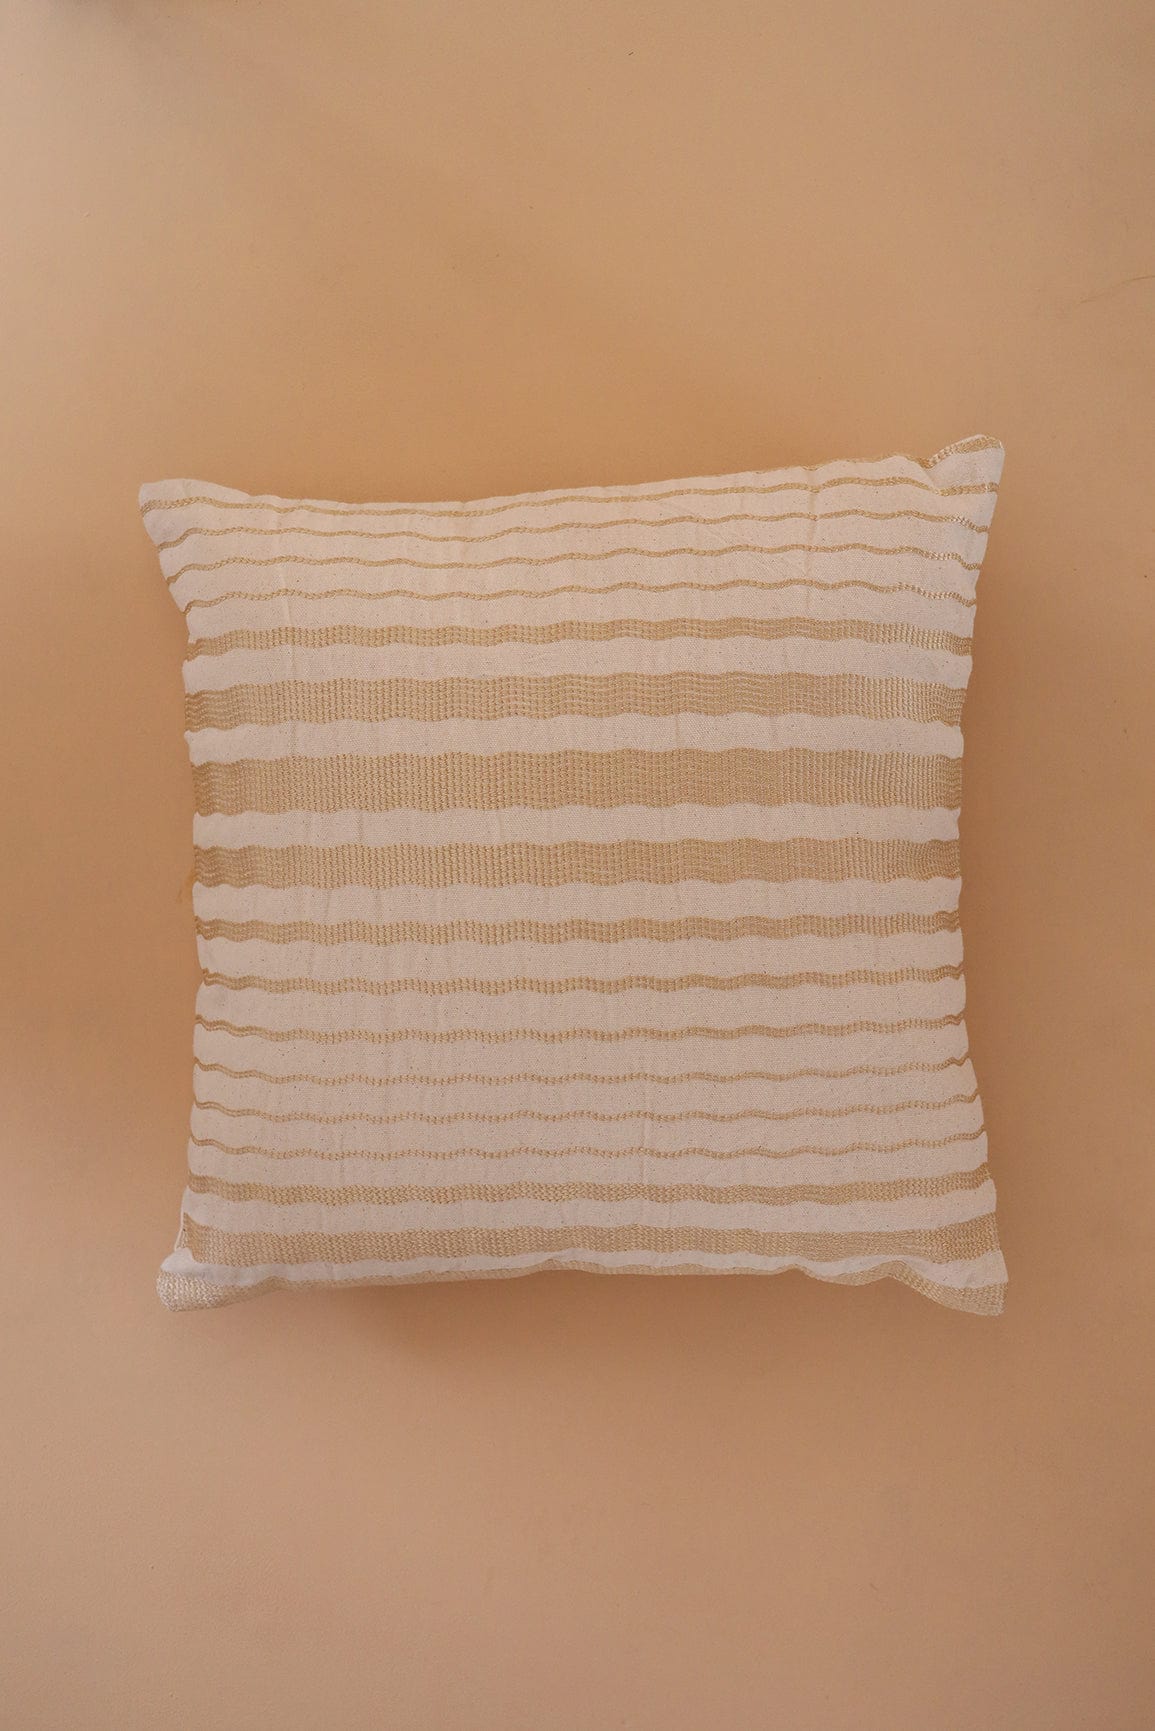 doeraa Gold Waves Embroidery on off white cotton Cushion Cover (16*16 inches)